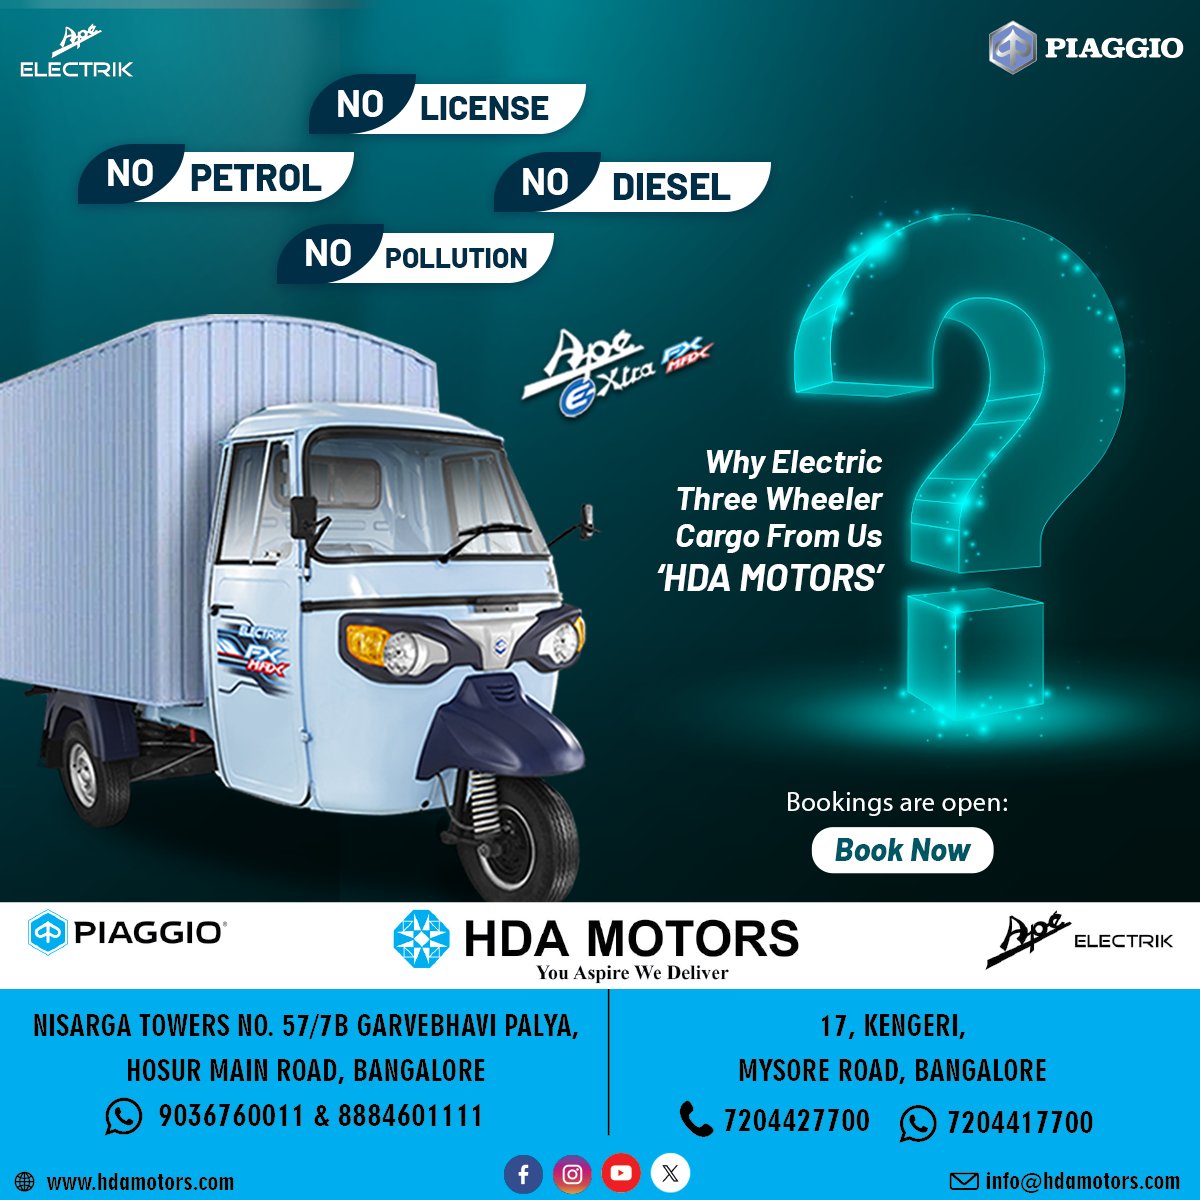 Why choose electric three-wheeler cargo from 'HDA MOTORS'?

- No License Required
- No Petrol or Diesel Needed
- Zero Pollution Emissions

Experience eco-friendly and hassle-free mobility with the #ApeEXtraFXMax! #GreenMobility #ElectricVehicle #ZeroEmissions